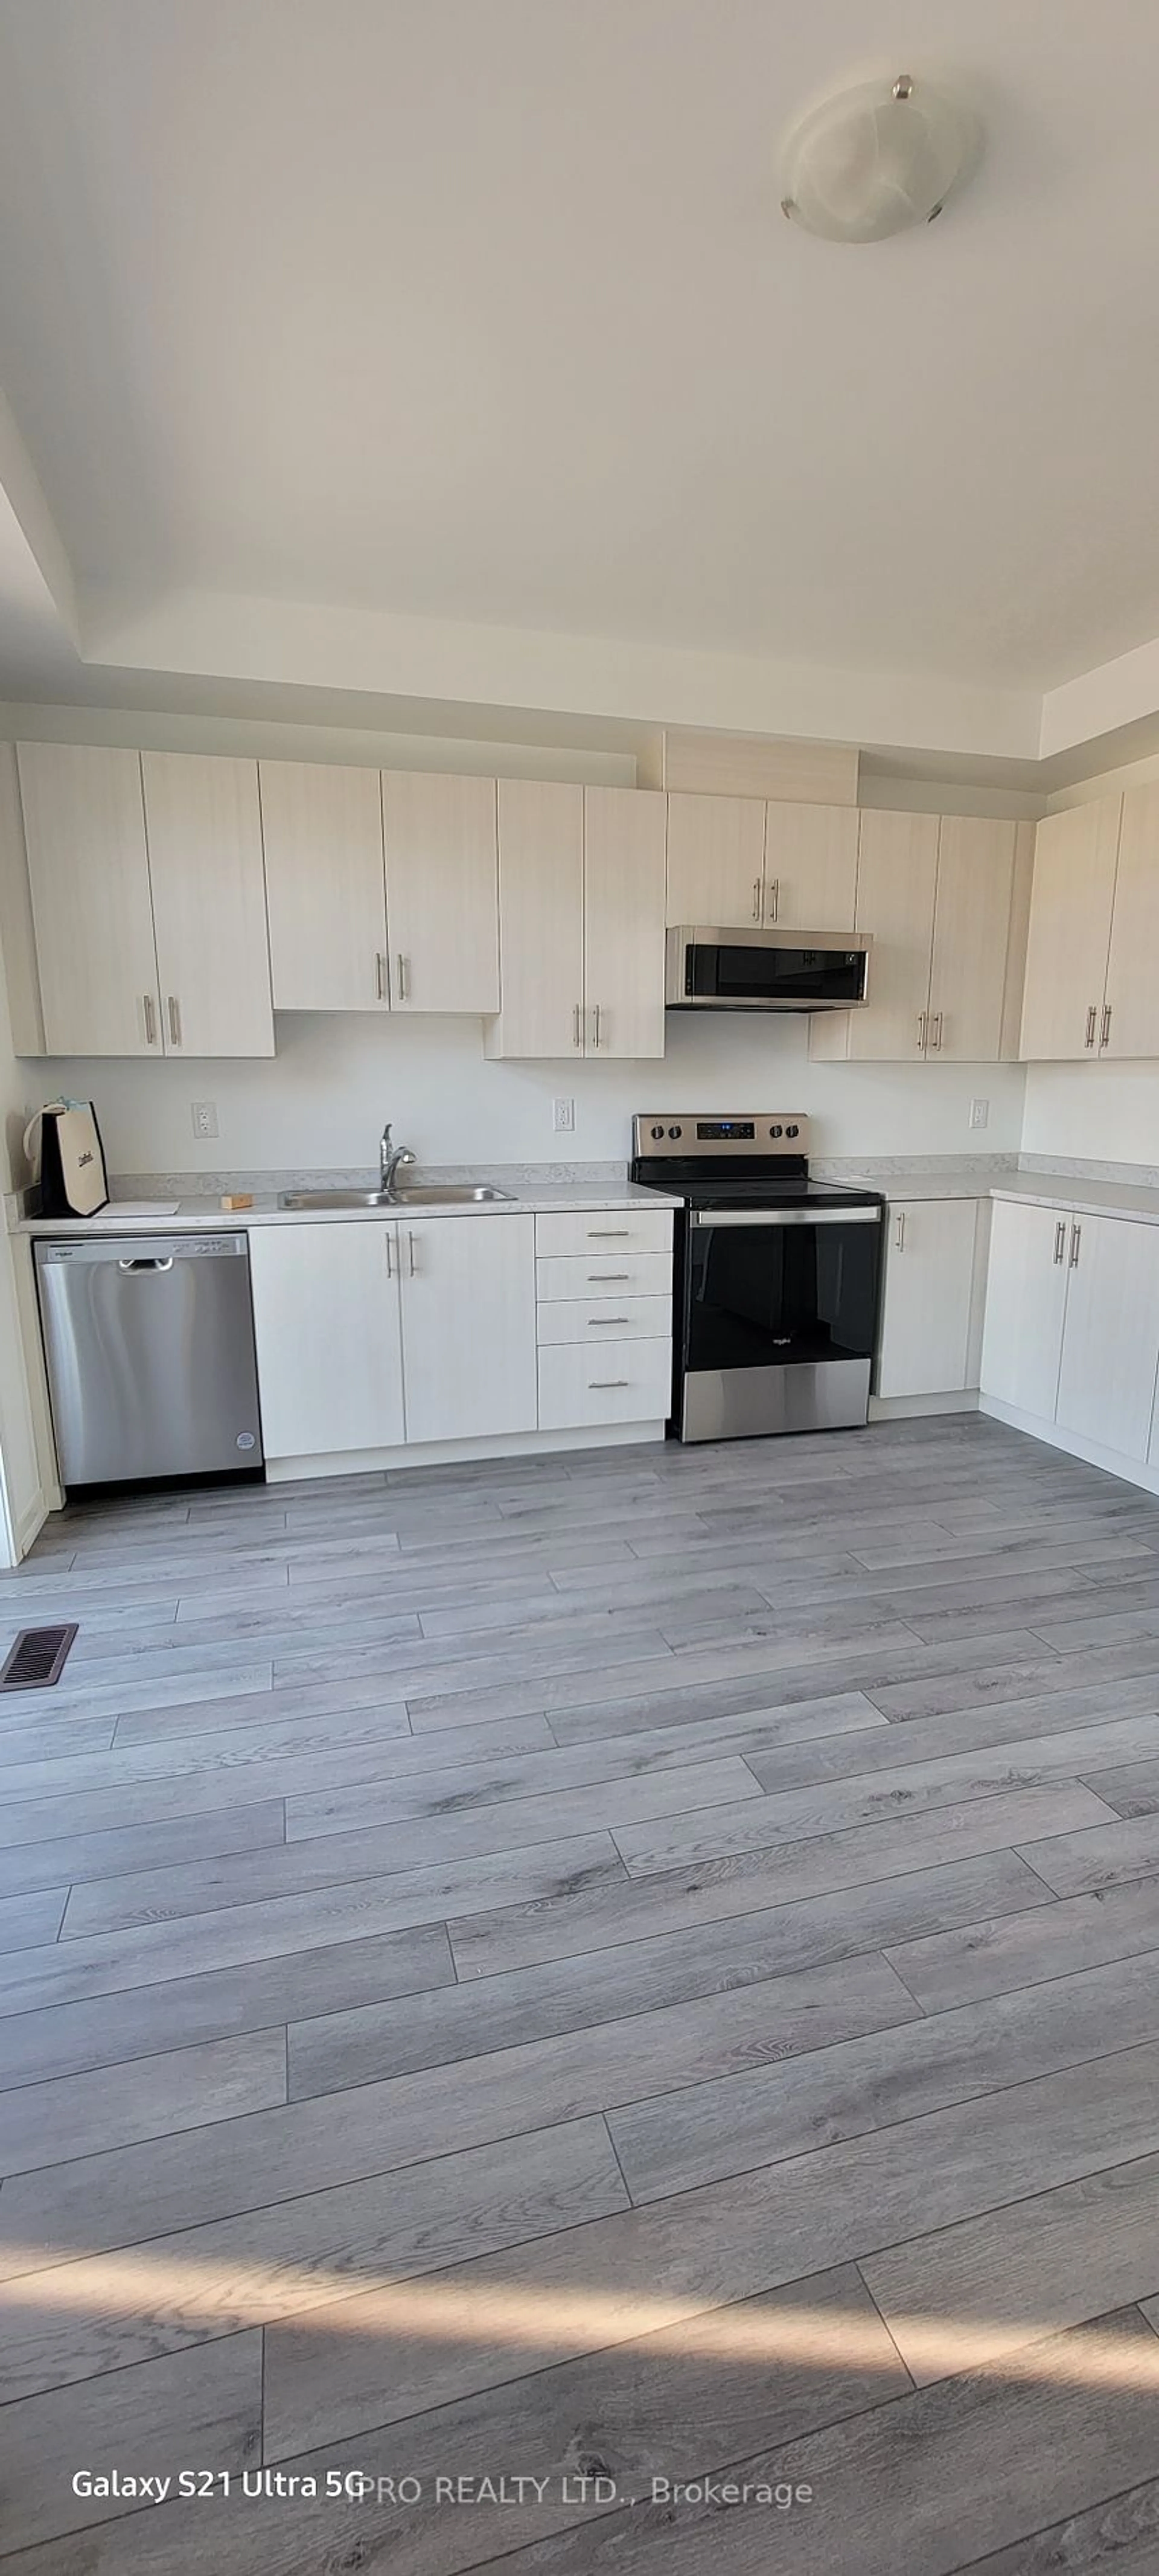 Standard kitchen for 191 Monarch Ave, Ajax Ontario L1S 7M3